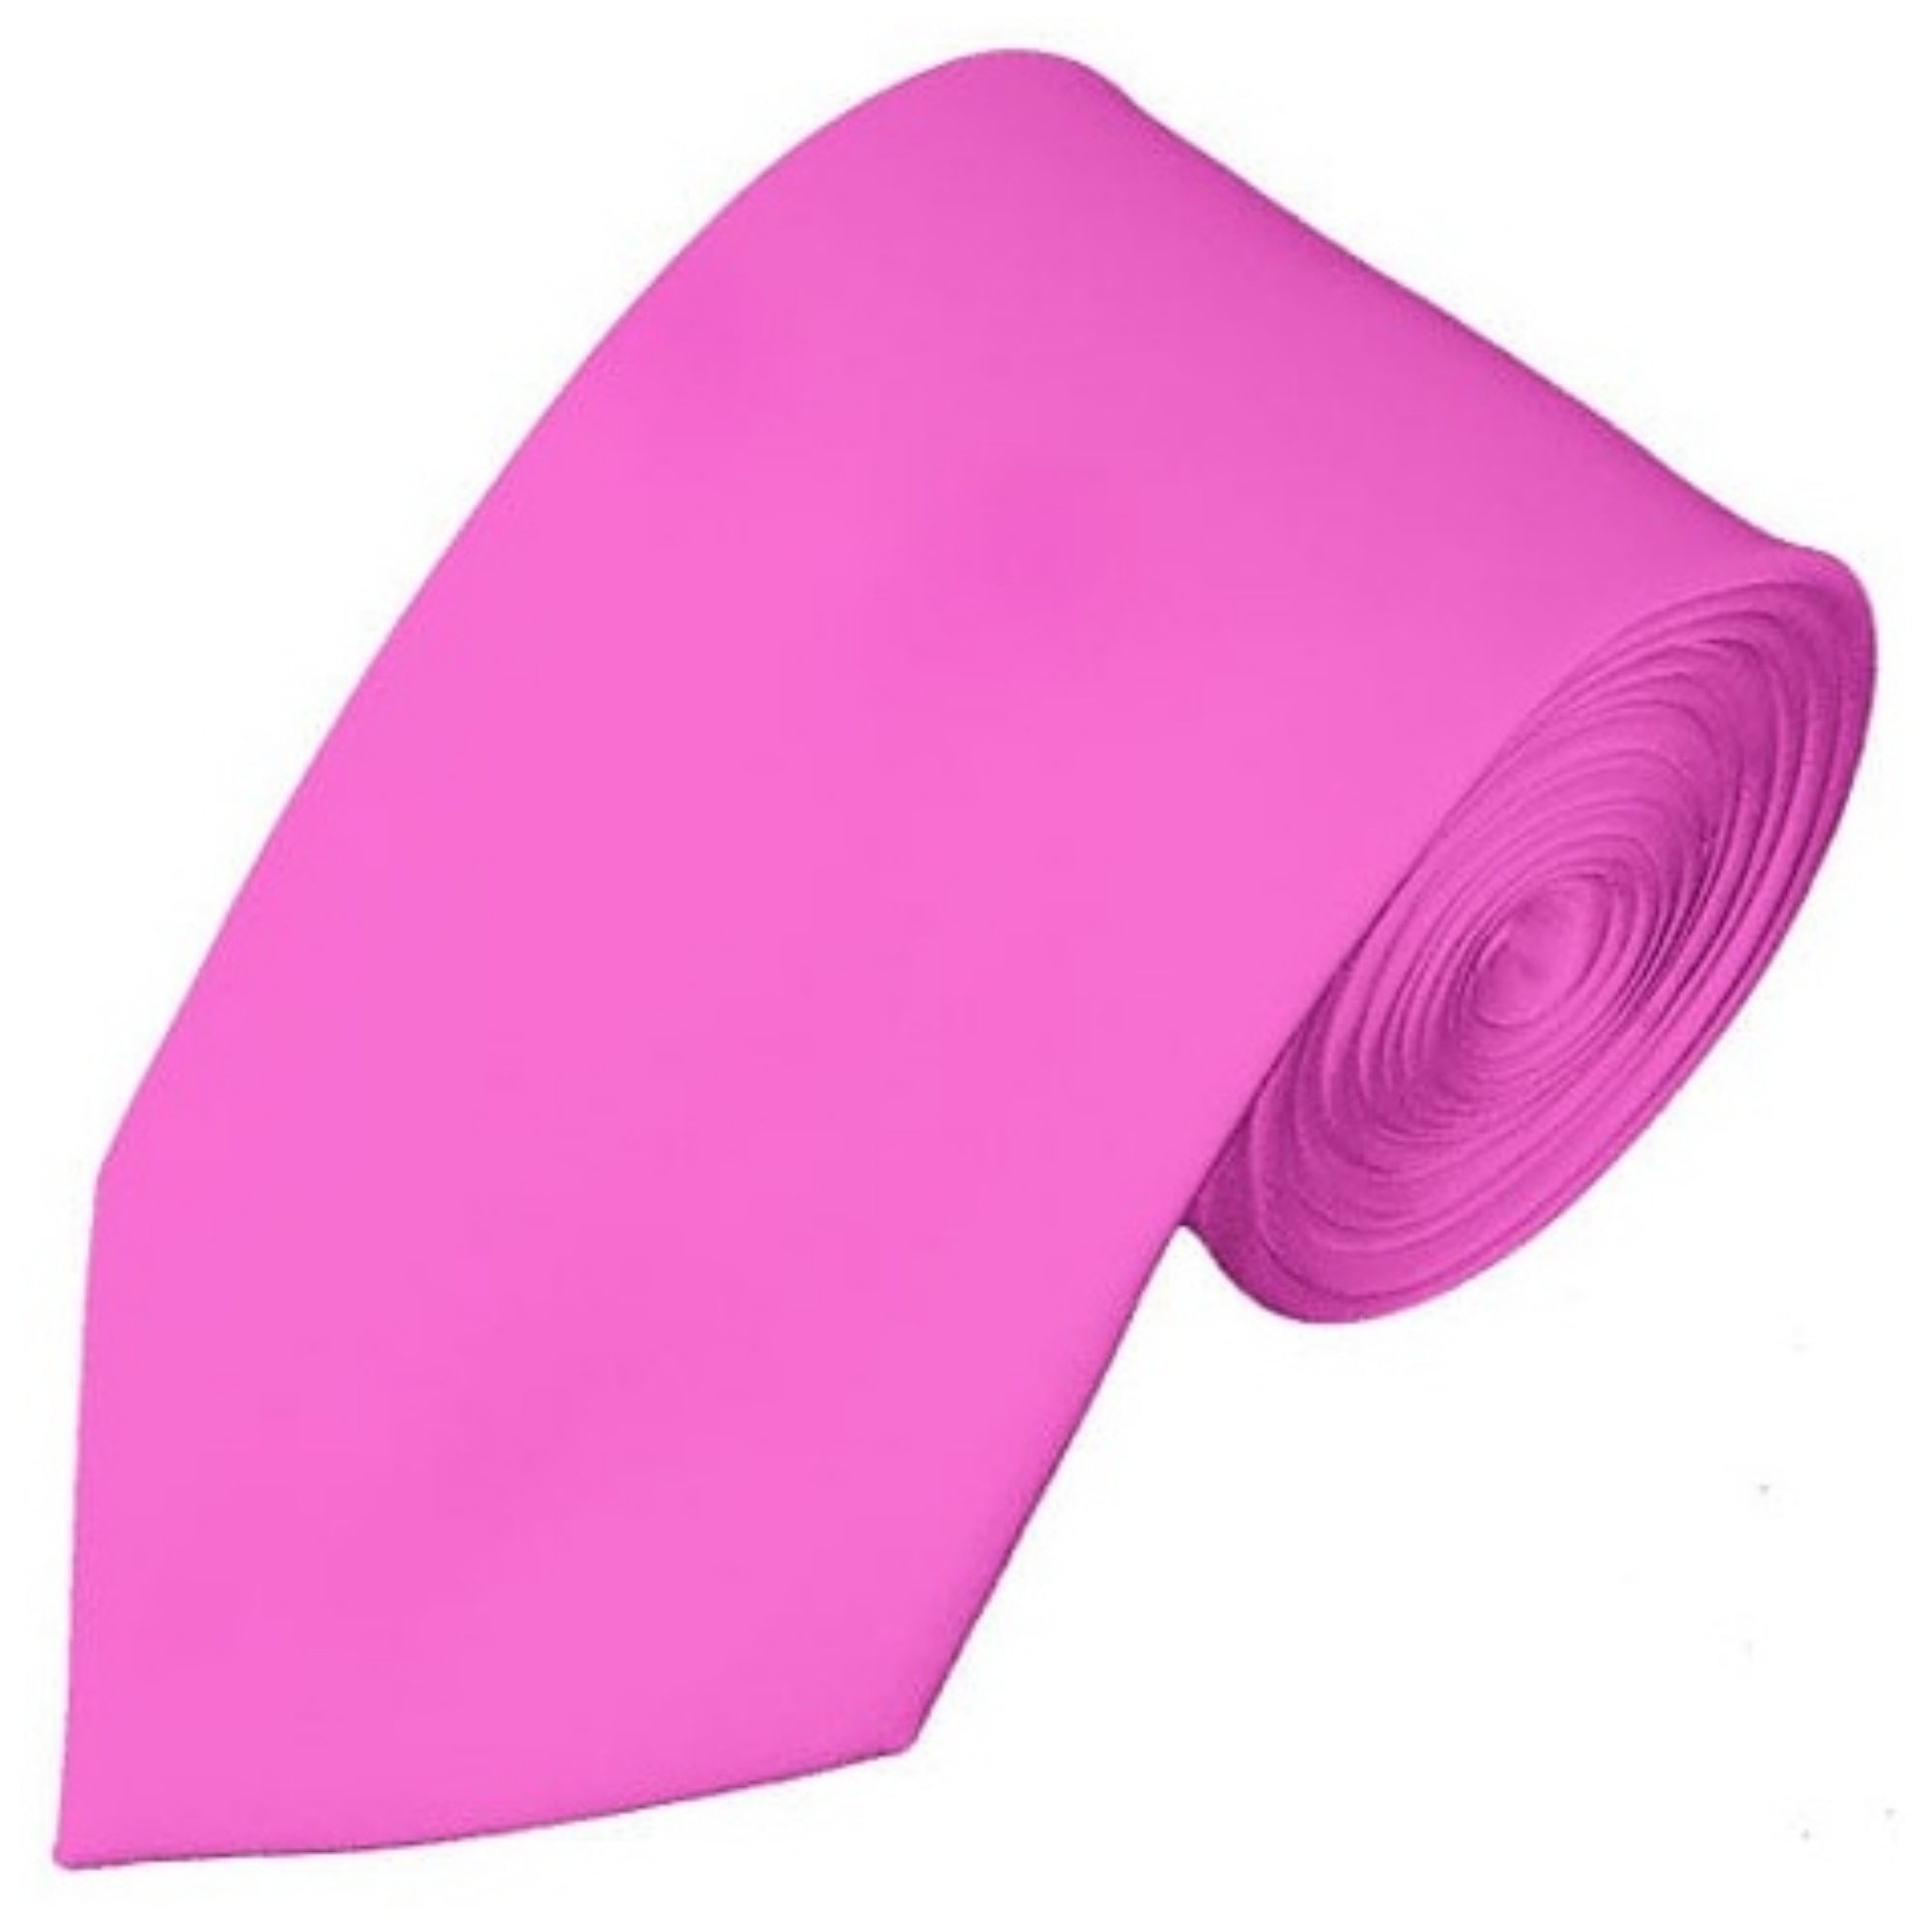 TheDapperTie Men's Solid Color Slim 2.75 Inch Wide And 58 Inch Long Neckties Neck Tie TheDapperTie Hot Pink  